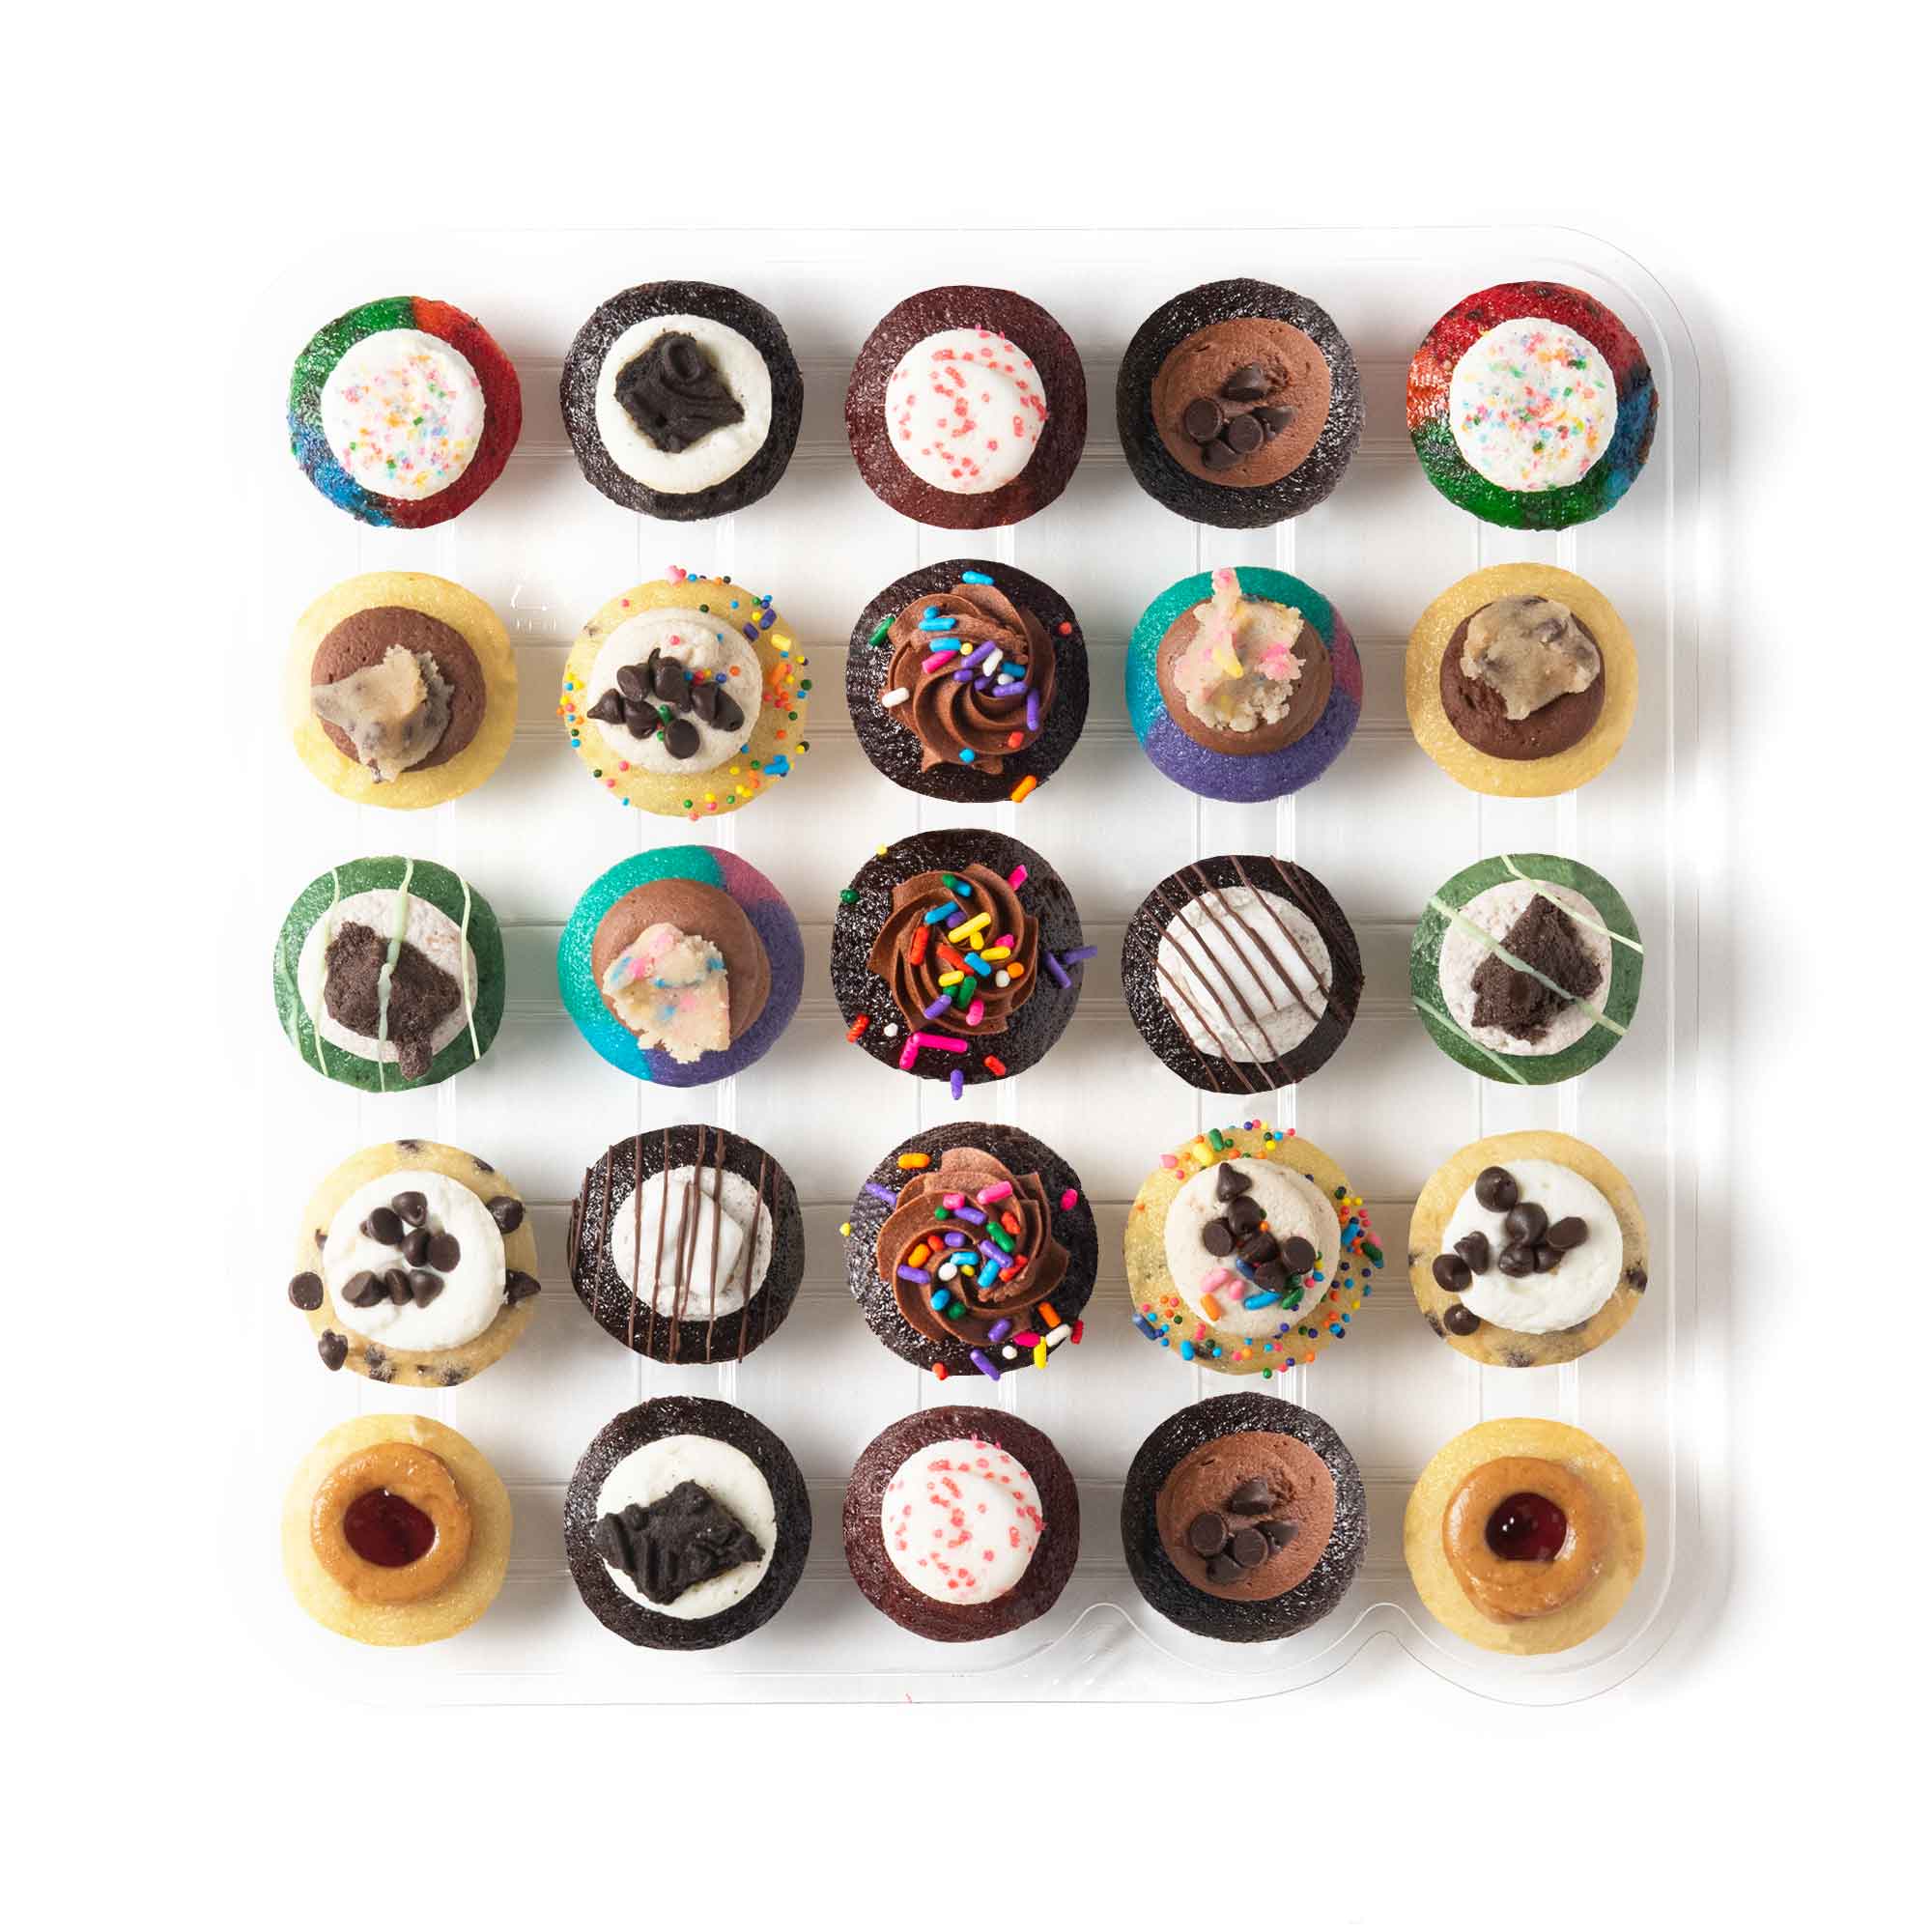 Baked by Melissa - Latest & Greatest - Assorted Bite-Size Cupcakes (25 Count)